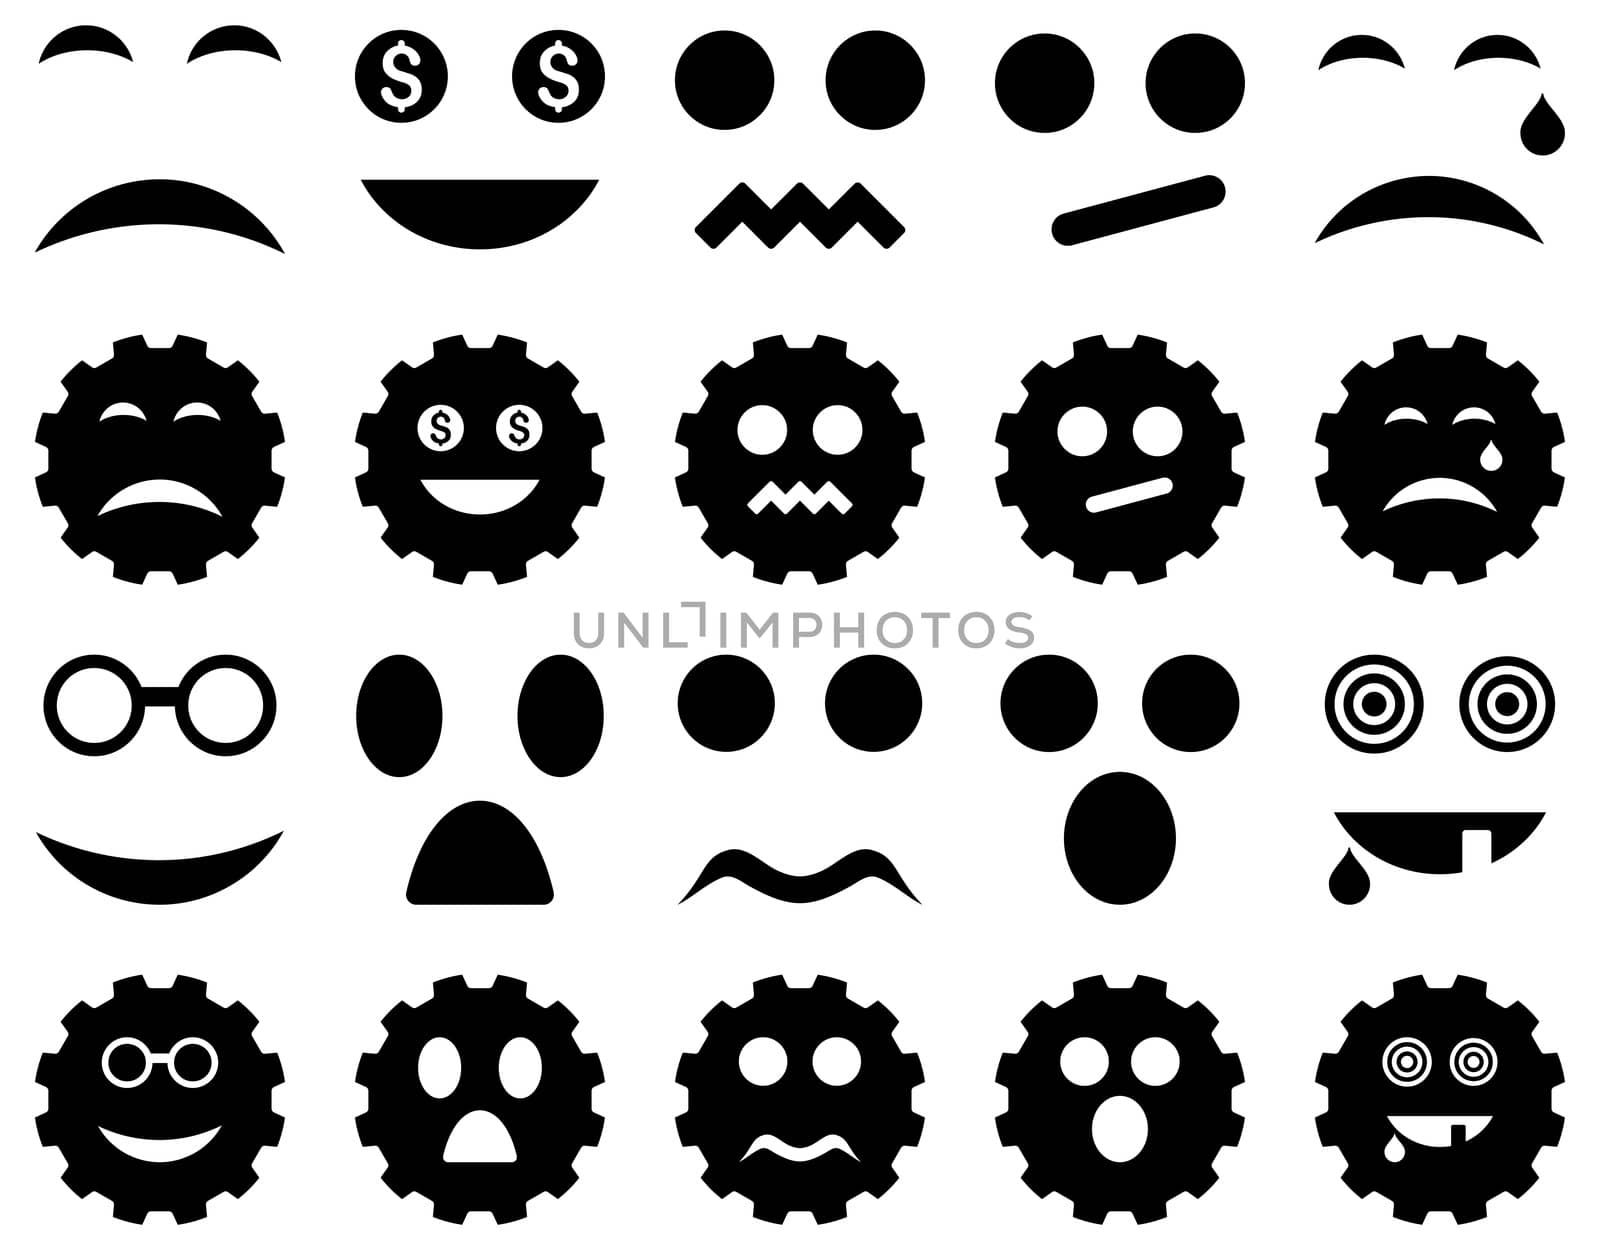 Tool, gear, smile, emotion icons. Glyph set style is flat images, black symbols, isolated on a white background.